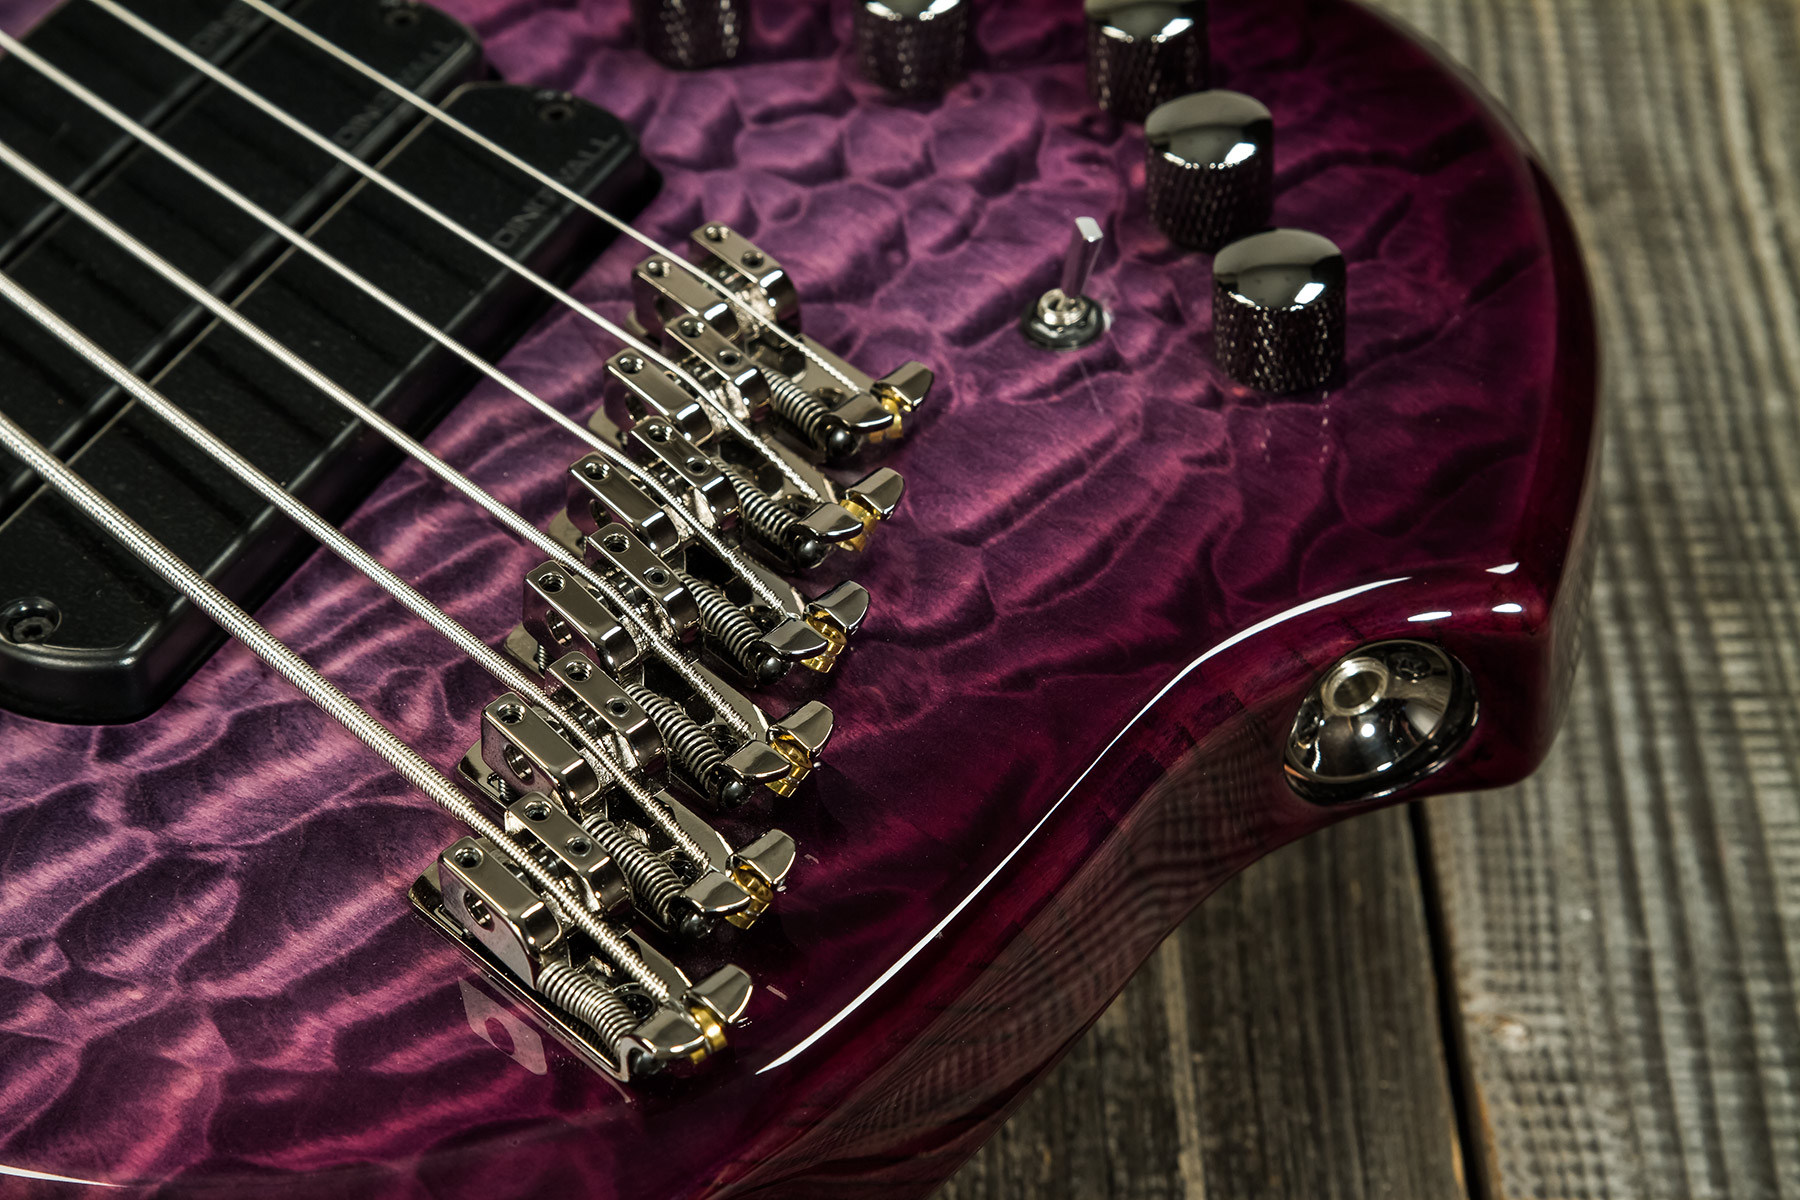 Dingwall Combustion Cb3 6c 3pu Active Mn - Ultraviolet - Solidbody E-bass - Variation 3